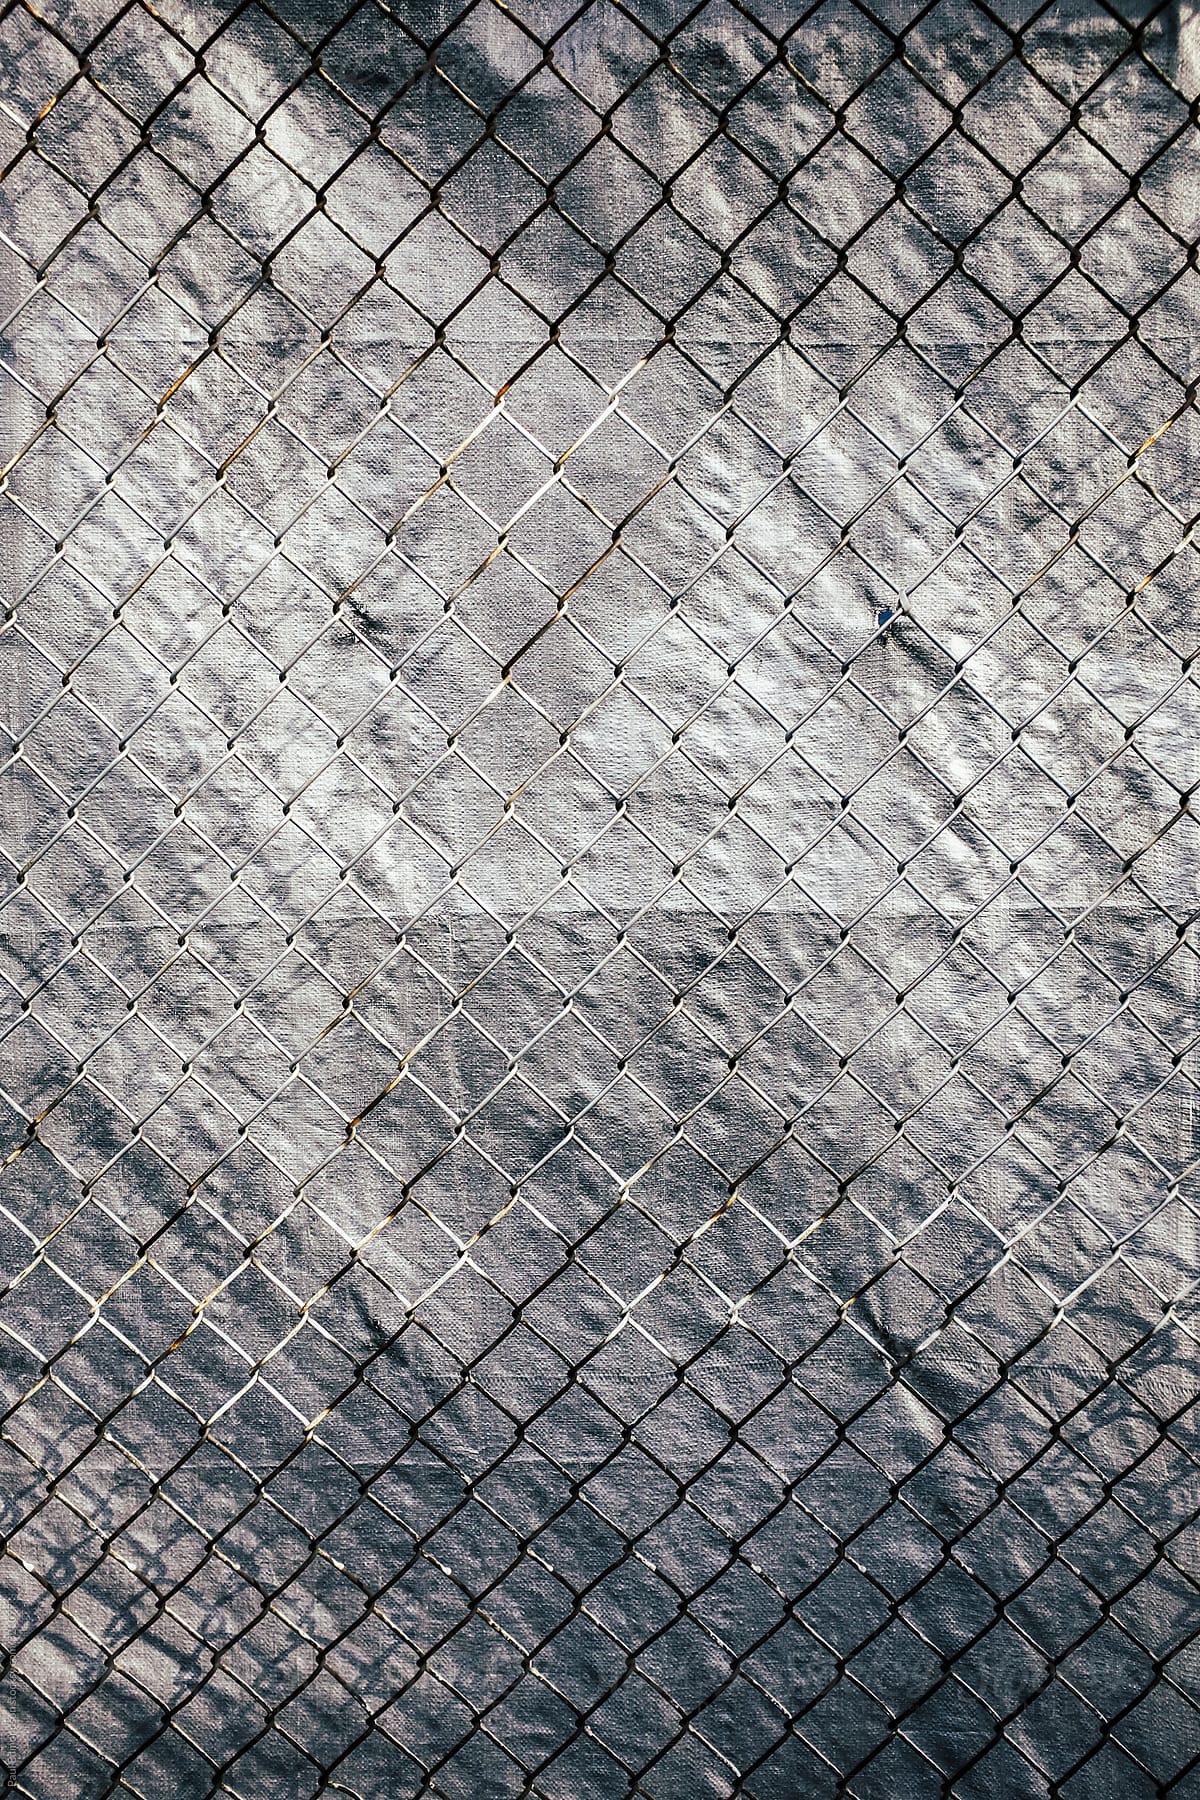 Chainlink fence in front of silver tarp